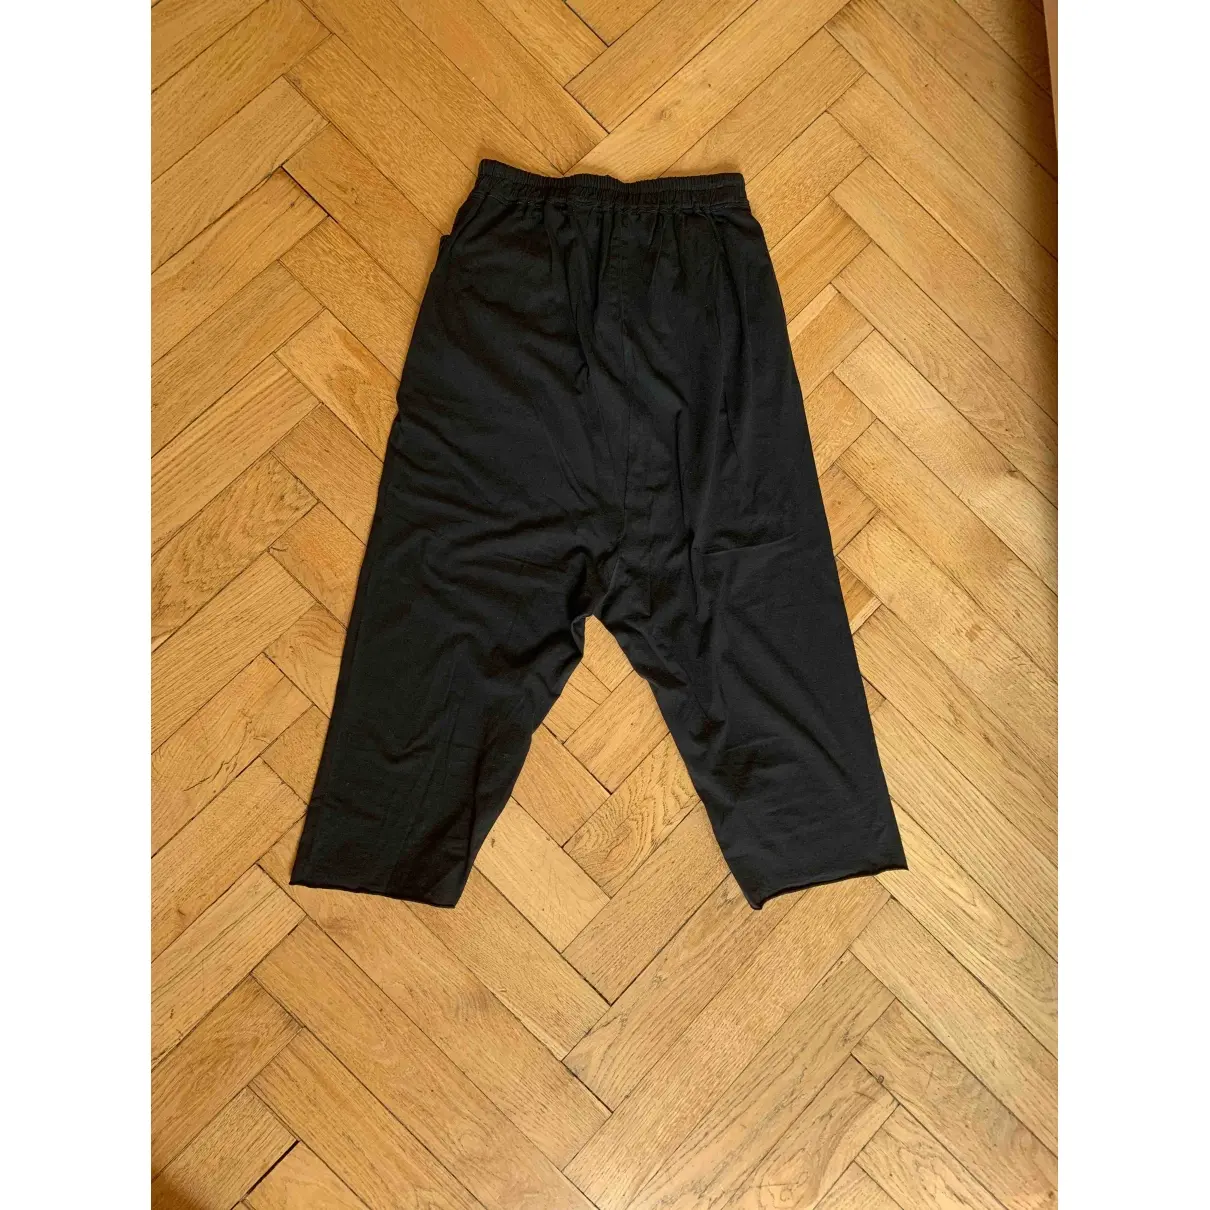 Rick Owens Drkshdw Trousers for sale